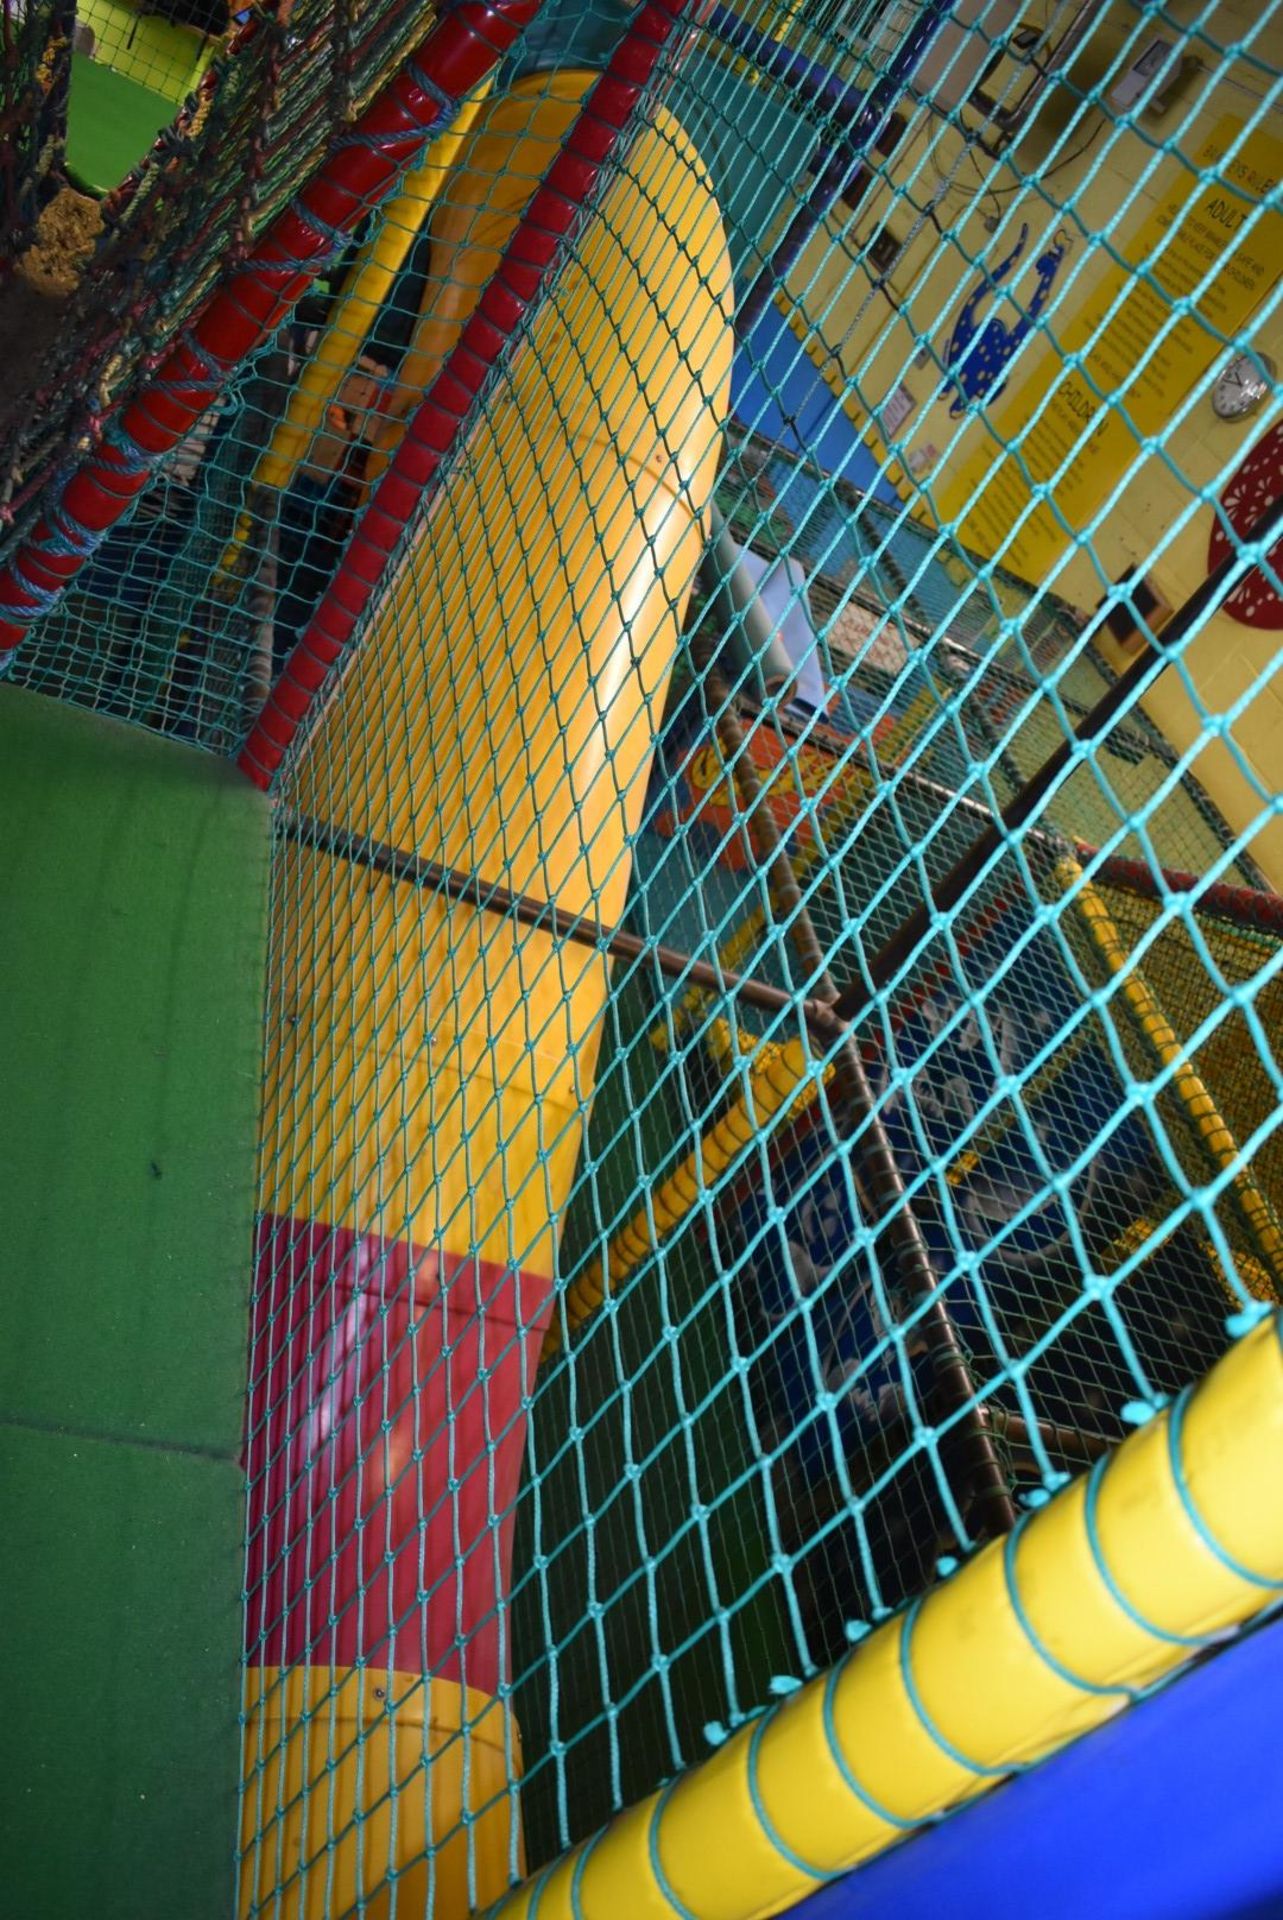 Bramleys Big Adventure Playground - Giant Action-Packed Playcentre With Slides, Zip Line Swings, - Image 13 of 99